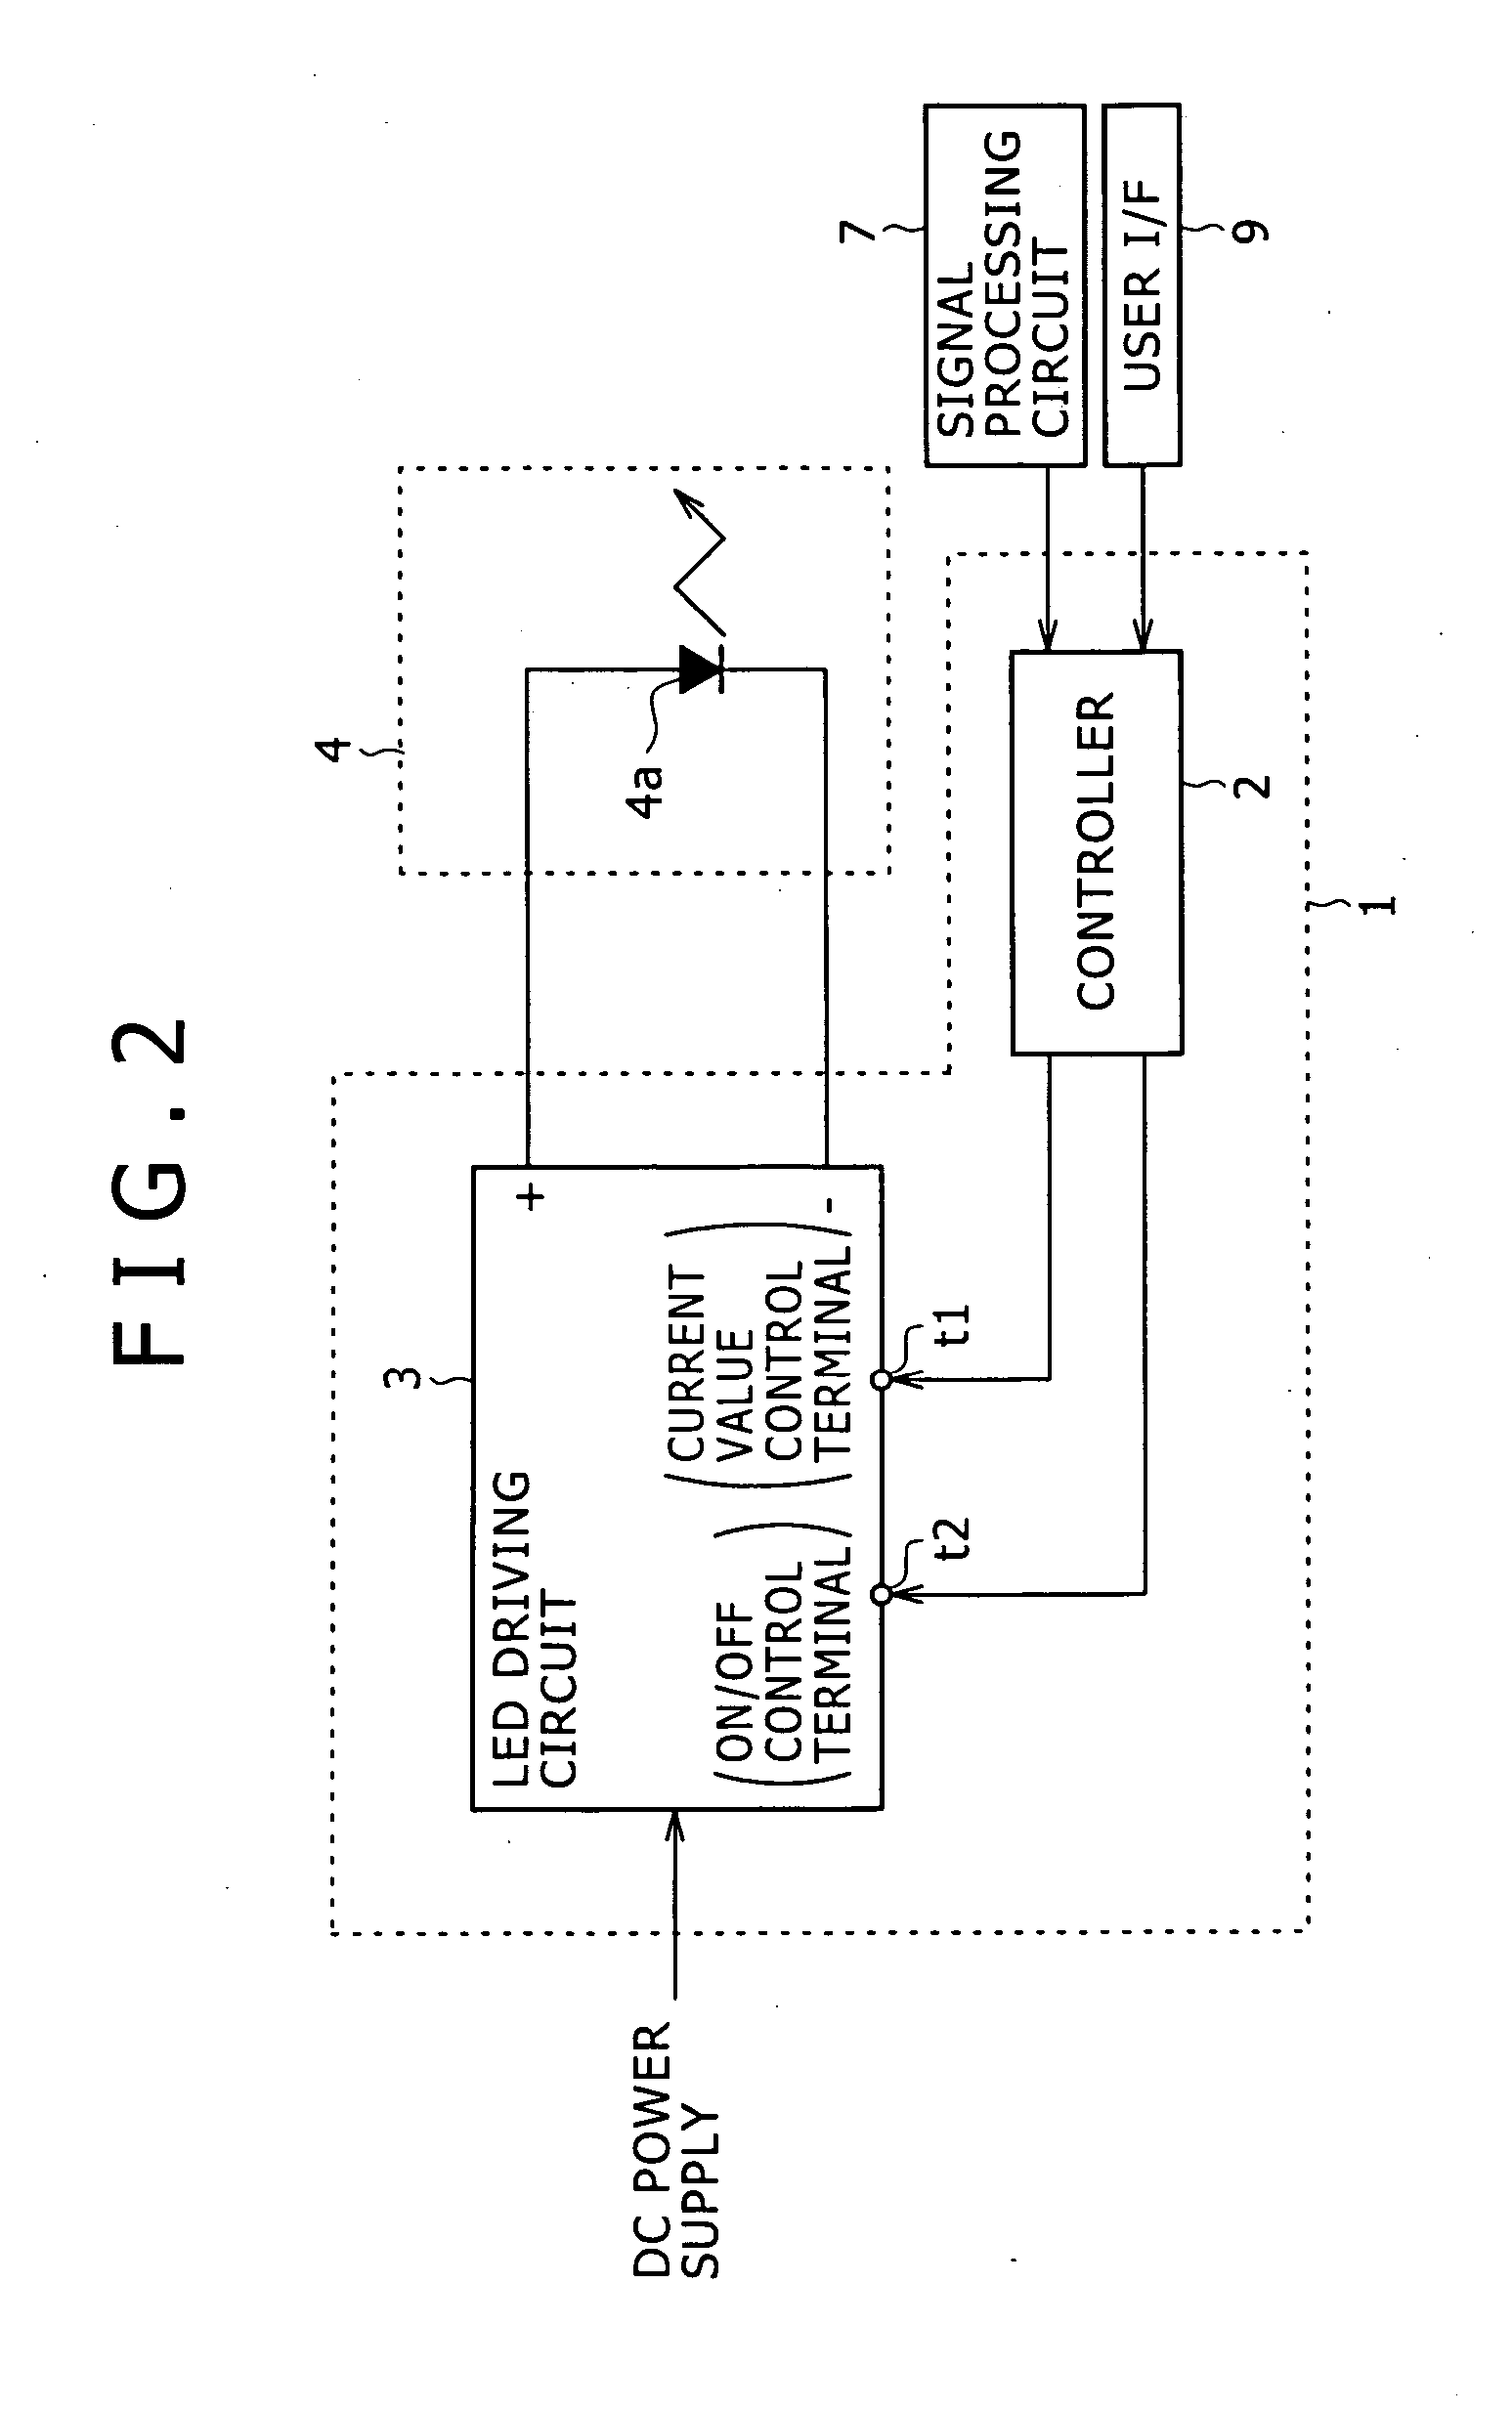 LED driving apparatus and method of controlling luminous power